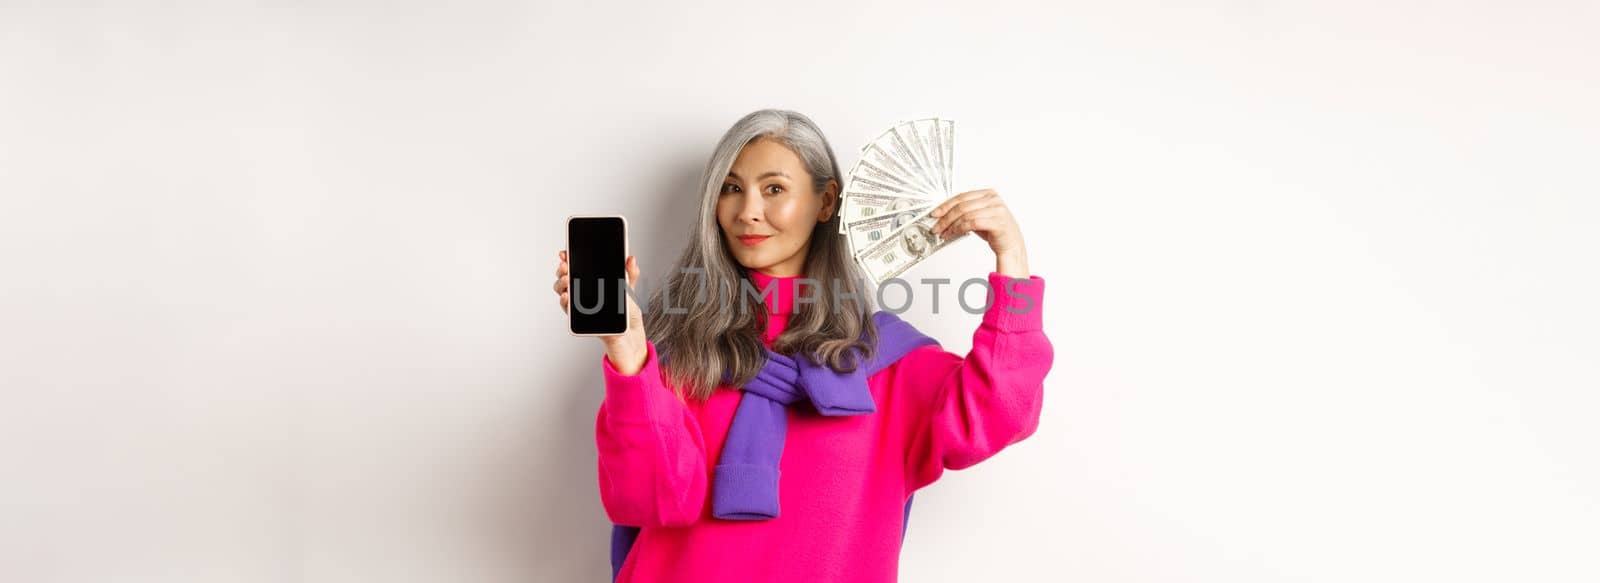 Fashionable asian senior woman showing money dollars and blank smartphone screen, demonstrate online shop, standing over white background.